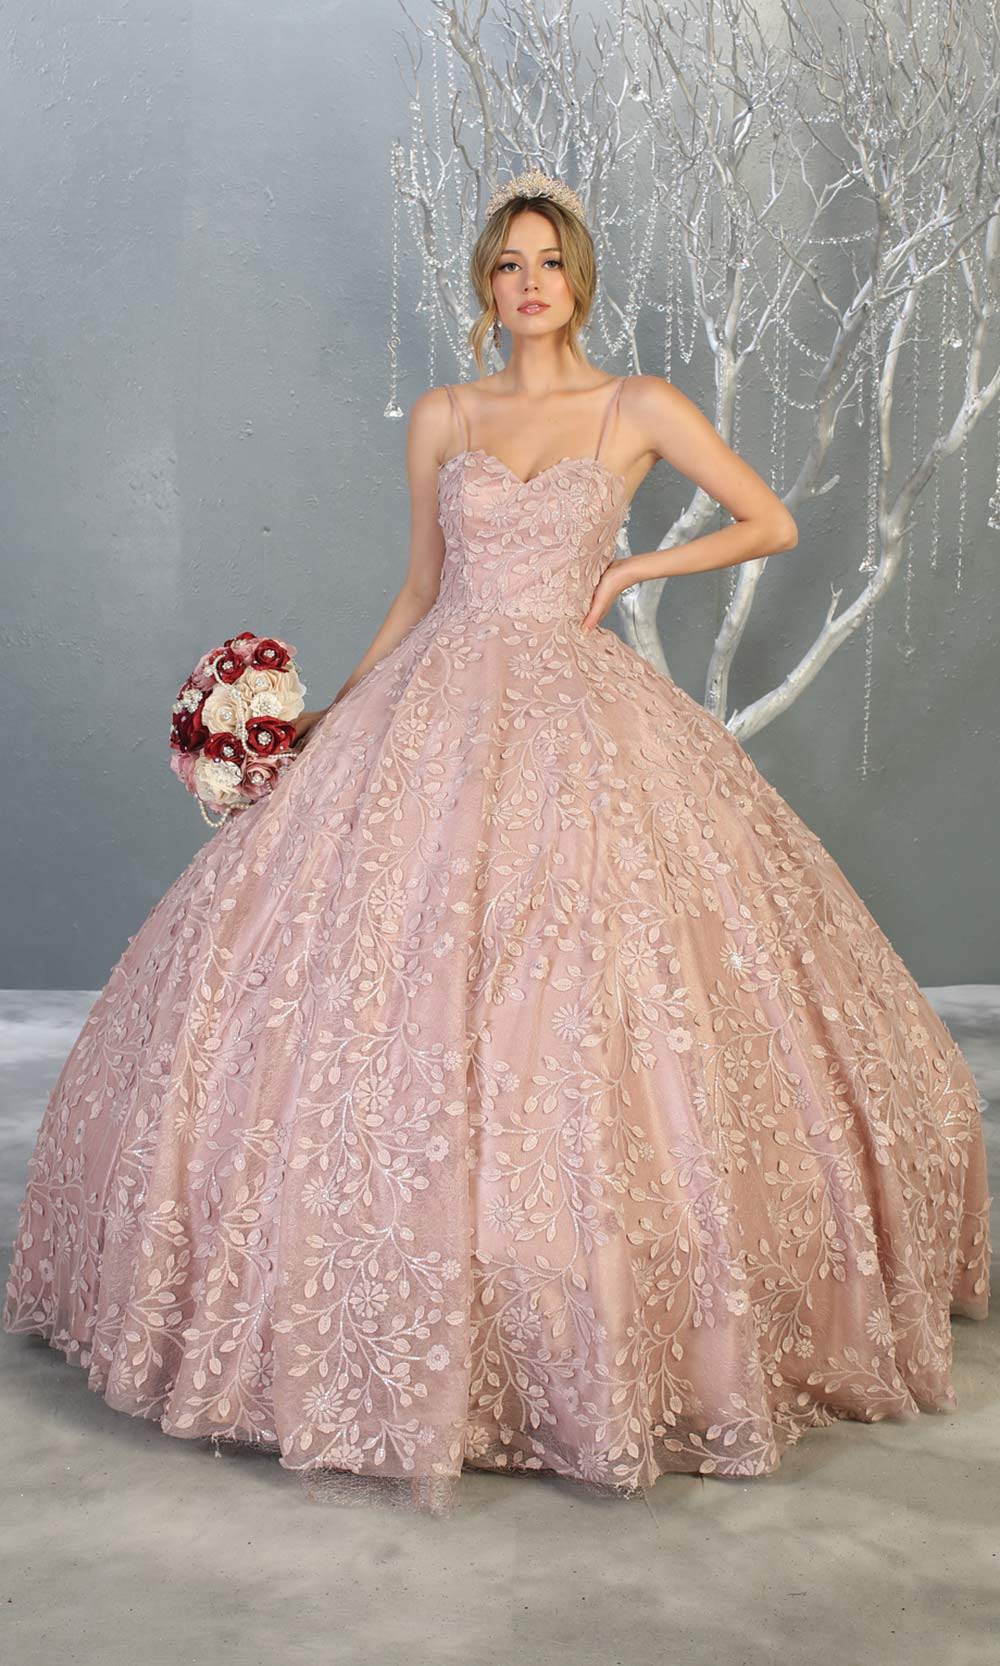 Mayqueen LK150 mauve pink quinceanera ball gown w/lace detail & thin straps. This dusty rose ball gown is perfect for engagement dress, wedding reception, indowestern party gown, sweet 16, debut, sweet 15, sweet 18. Plus sizes available for ballgowns.jpg